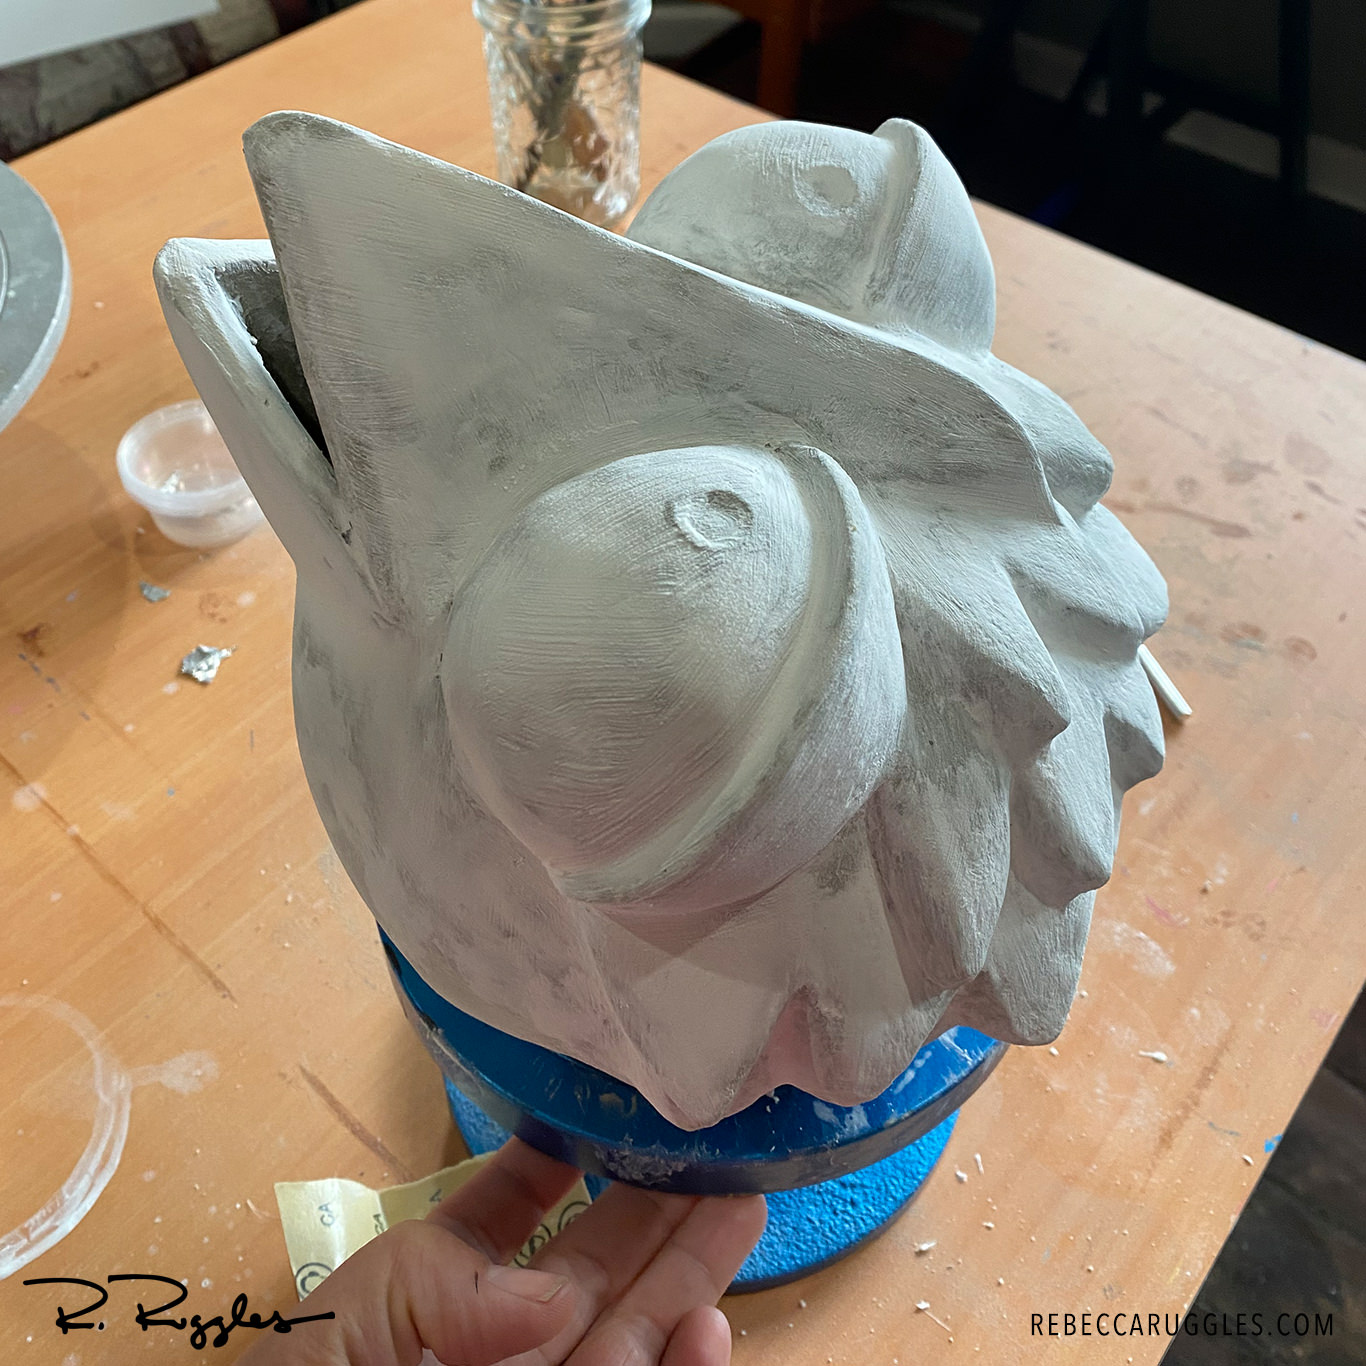 Smoothing the bird sculpture with sanding and joint compound.